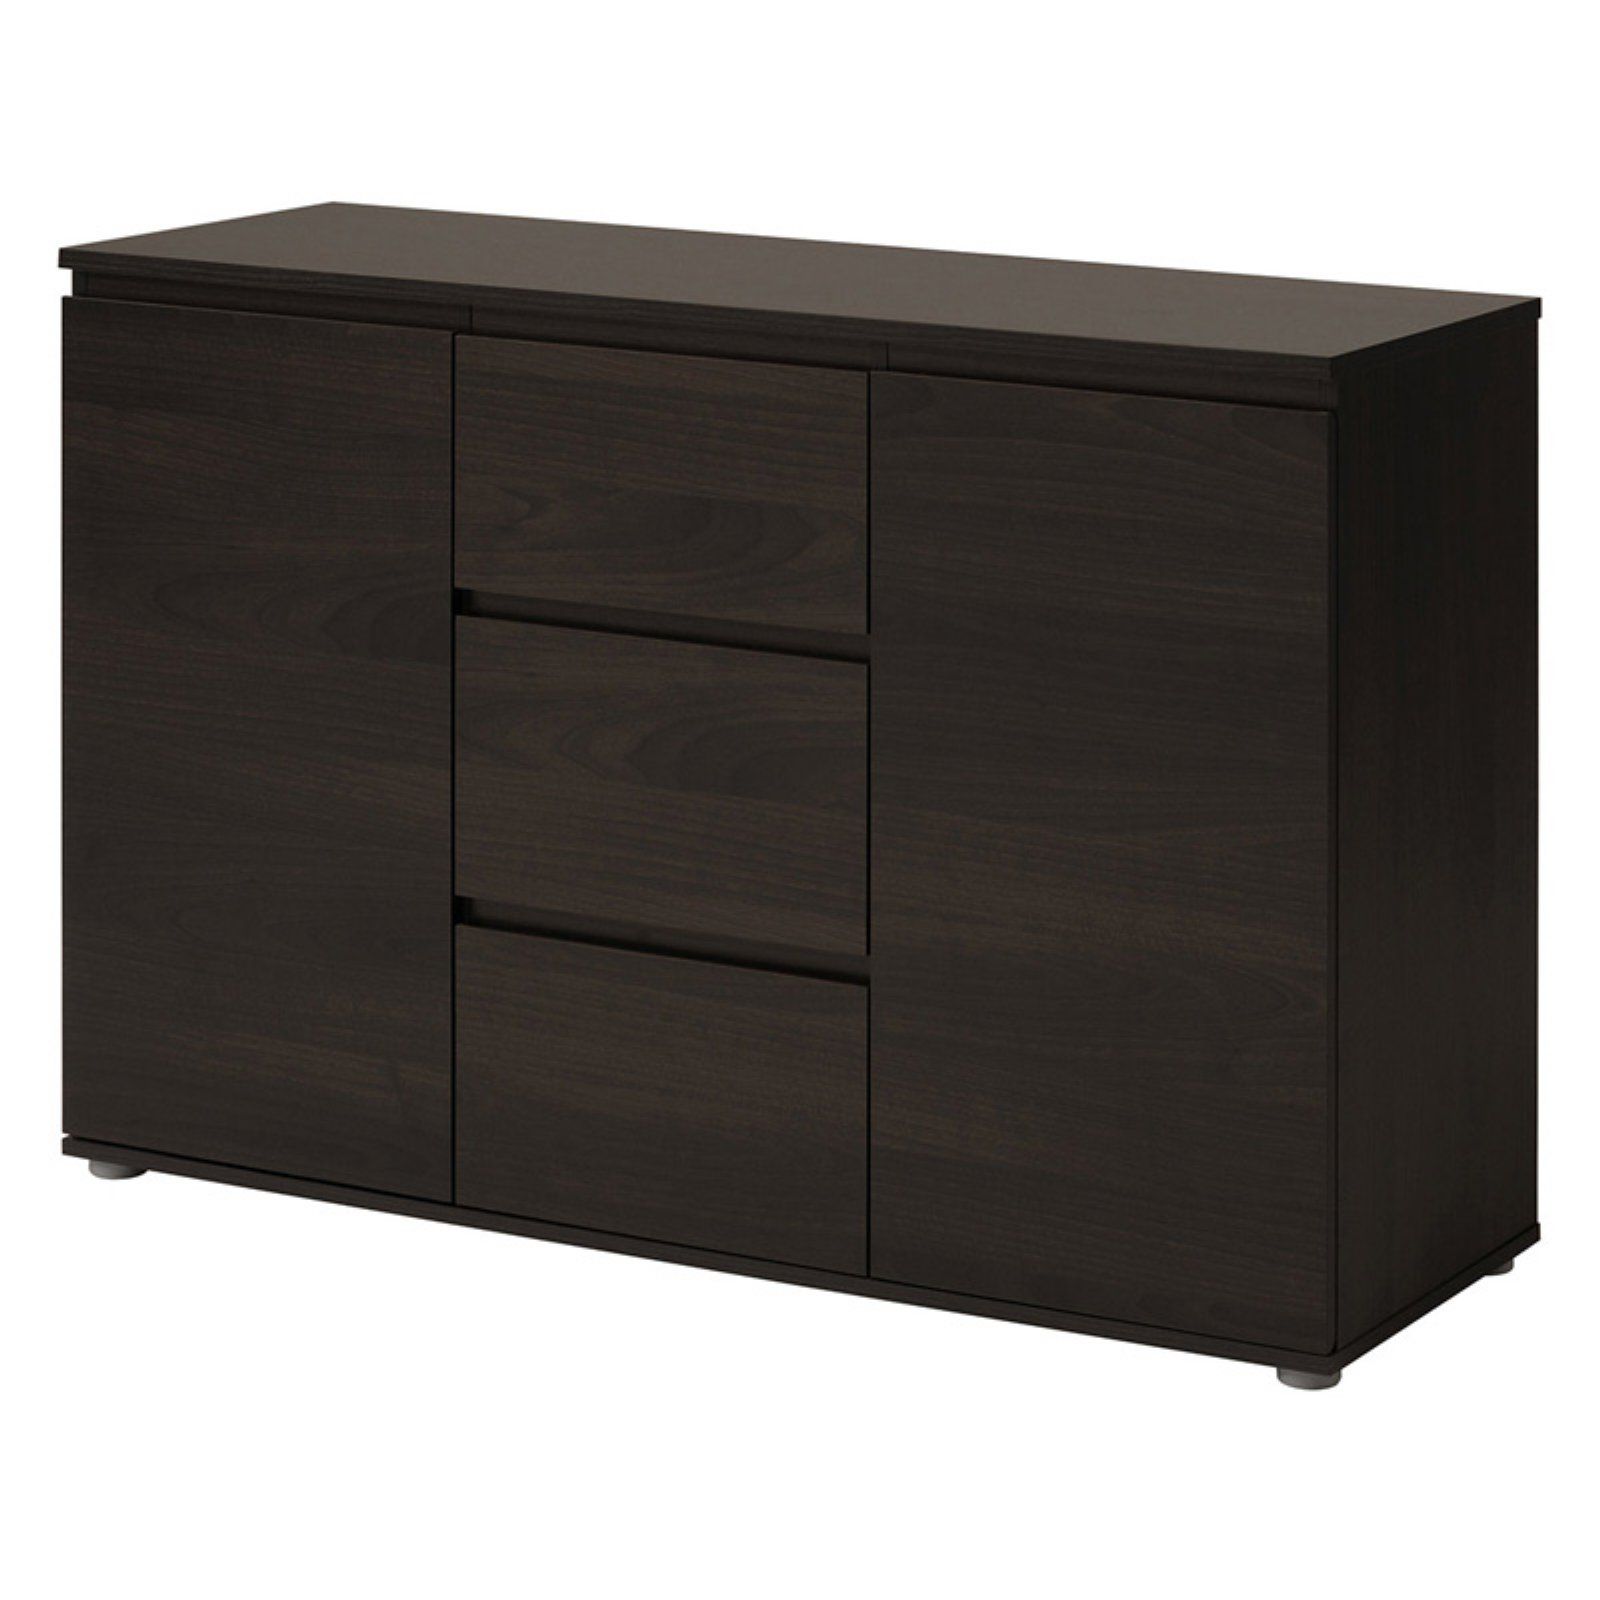 Parisot Neo Sideboard | Products In 2019 | Sideboard Pertaining To Wendell Sideboards (View 7 of 20)